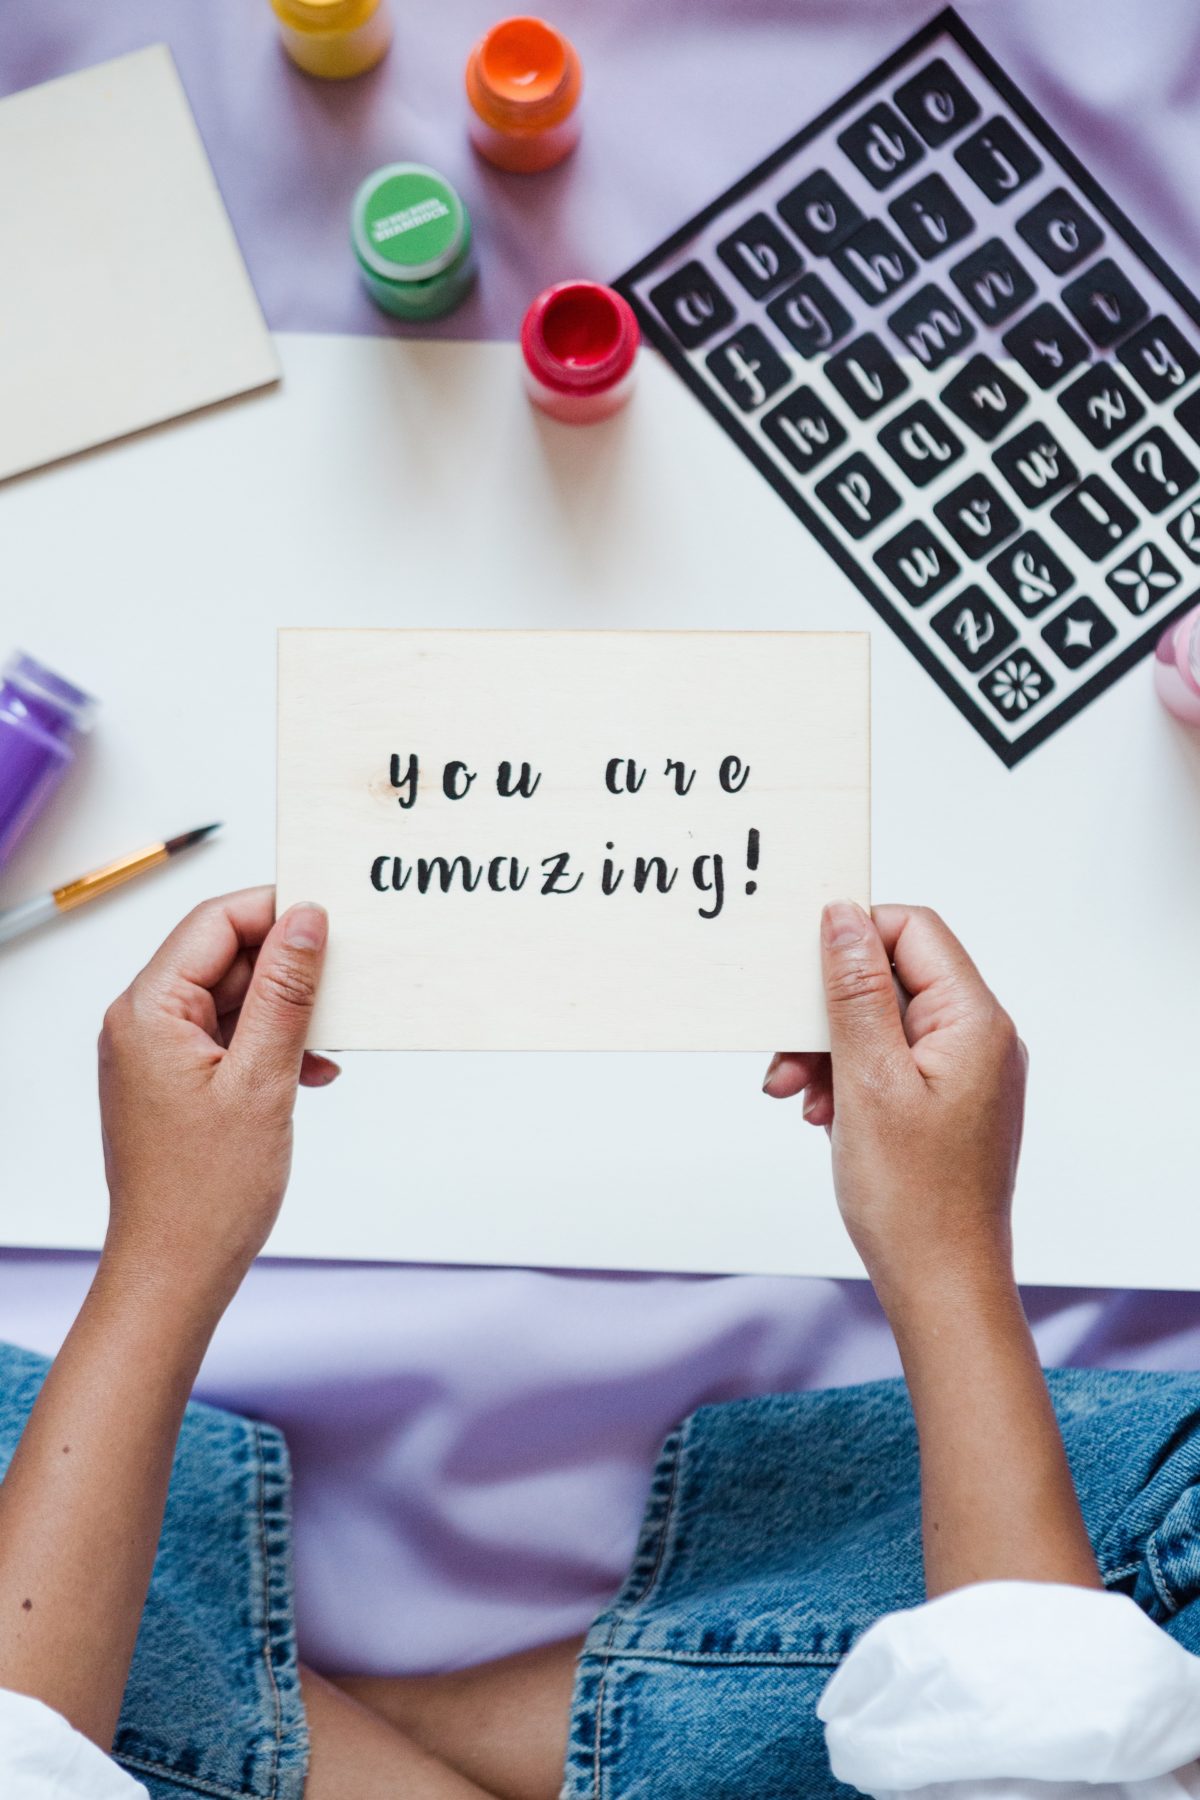 Note that says "You are amazing" .